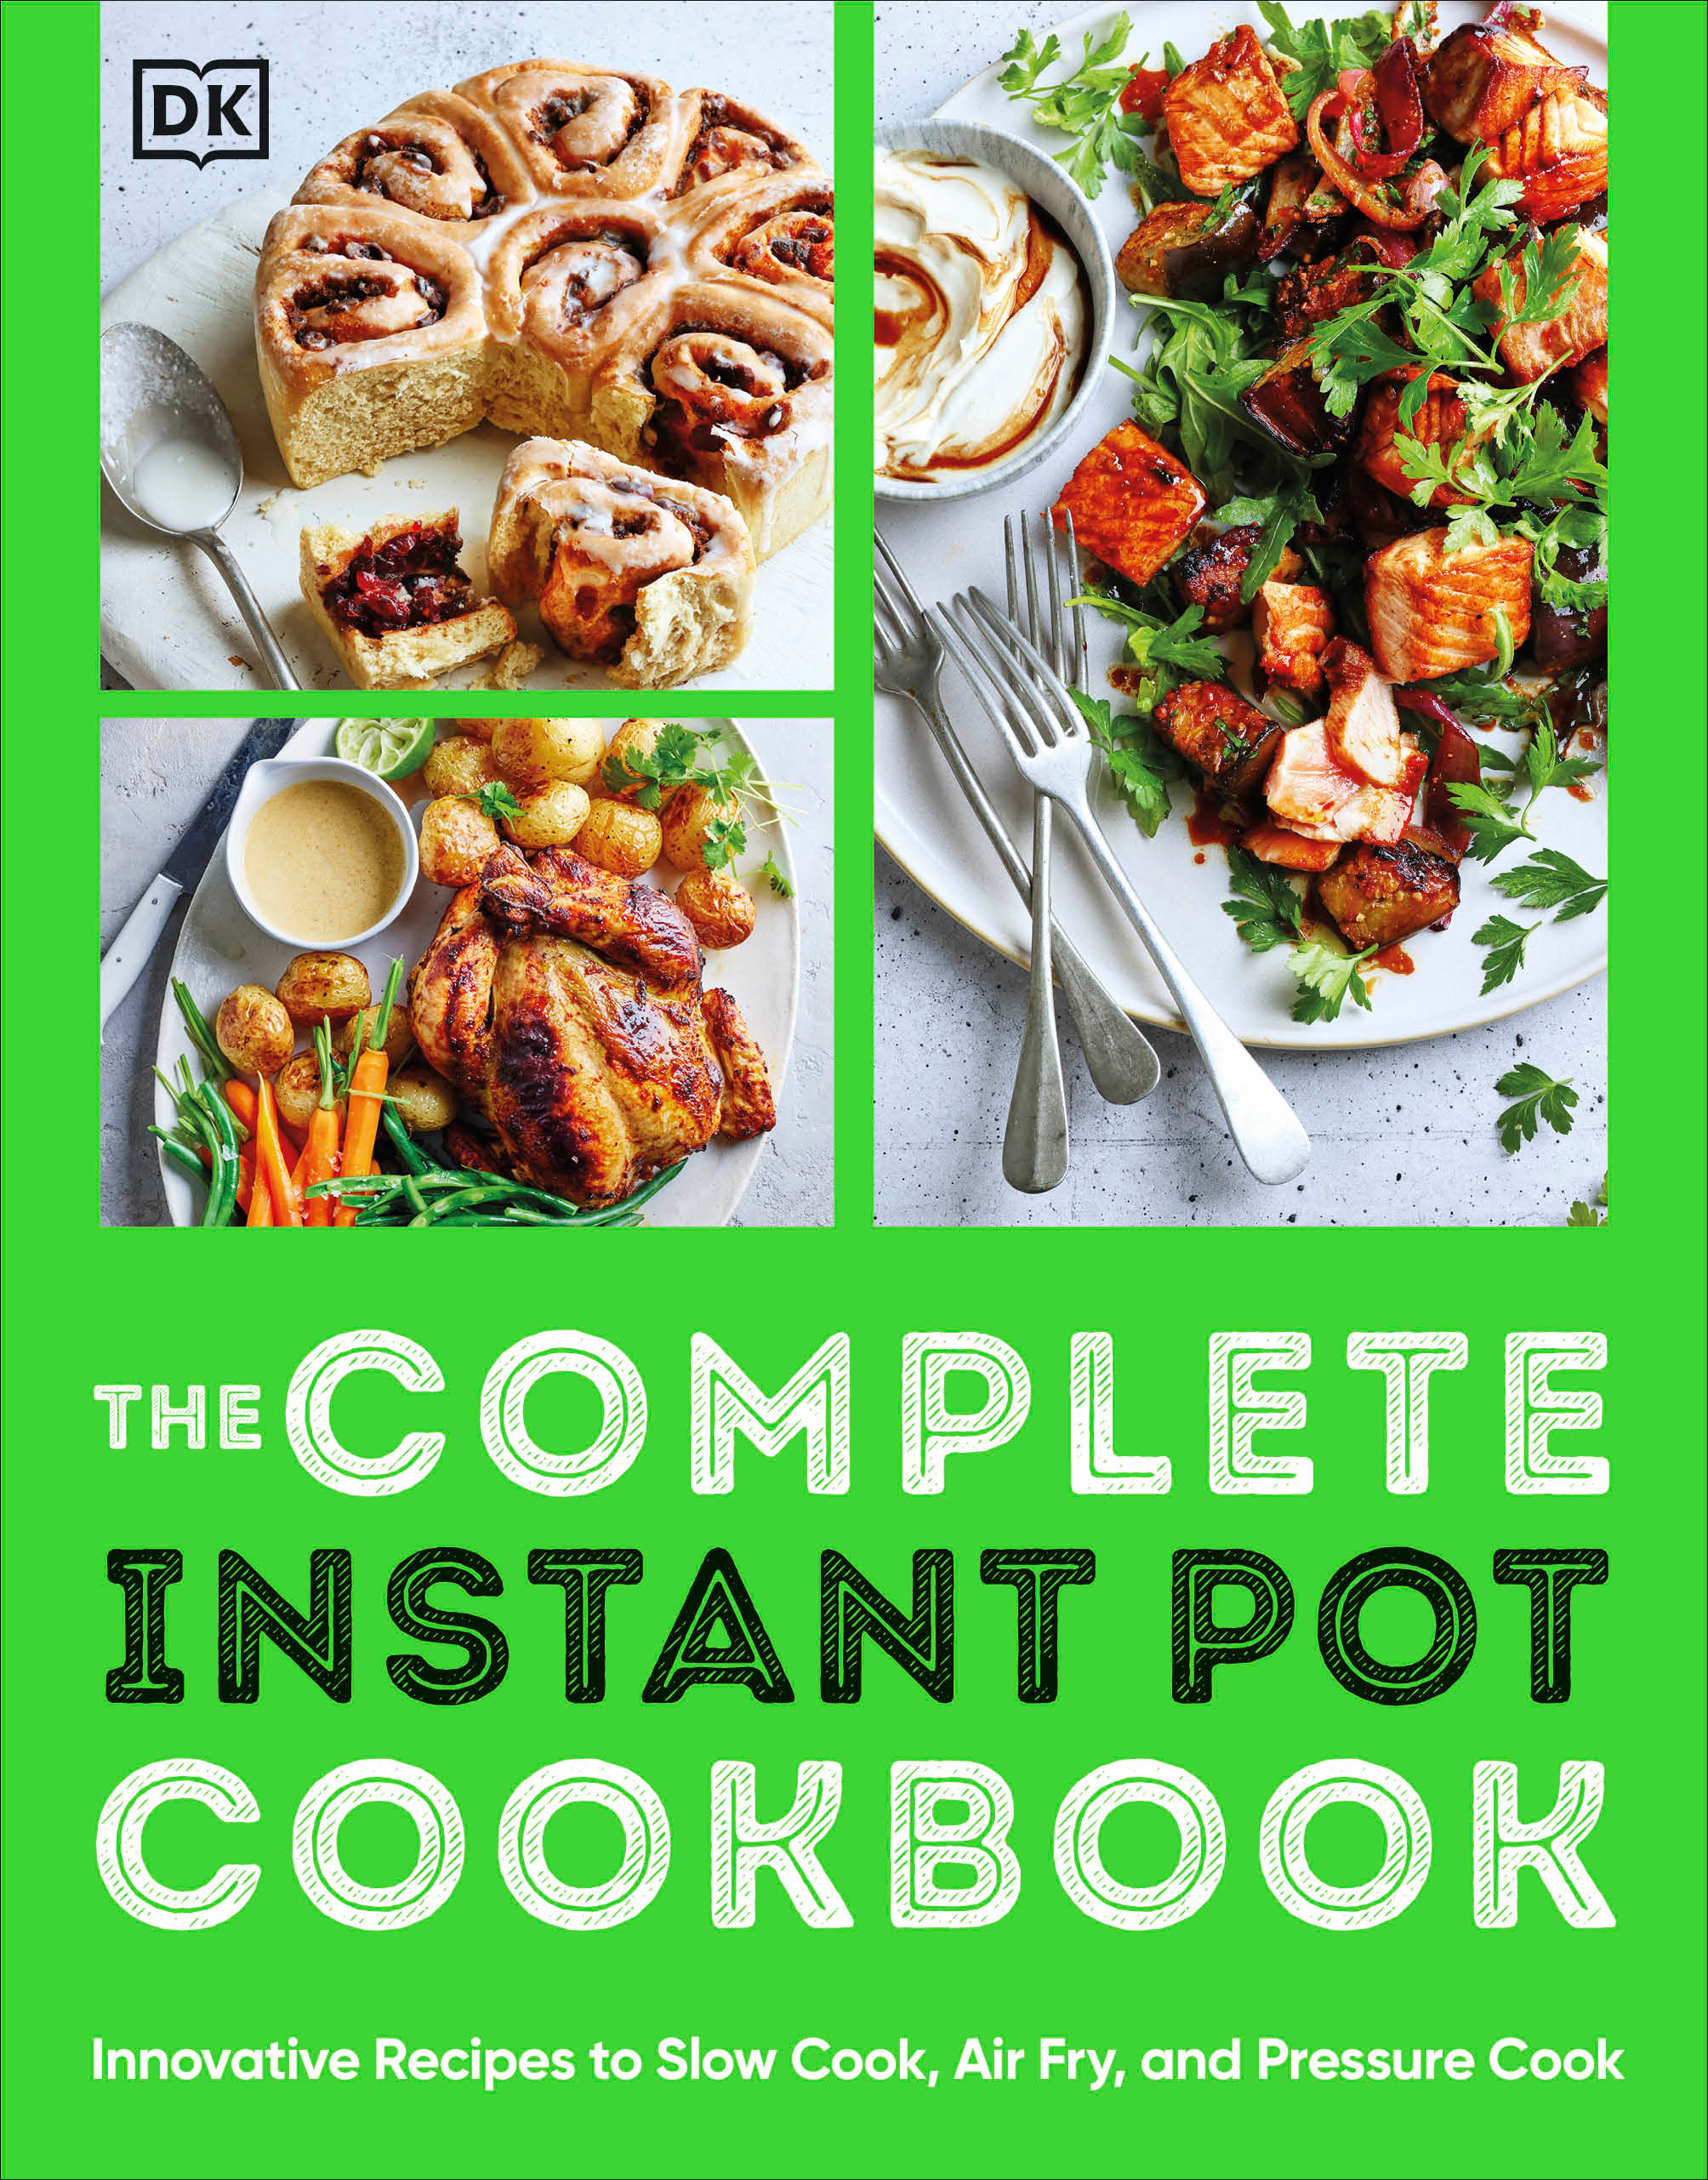 The Complete Instant Pot Cookbook : Innovative Recipes to Slow Cook, Bake, Air Fry and Pressure Cook | 